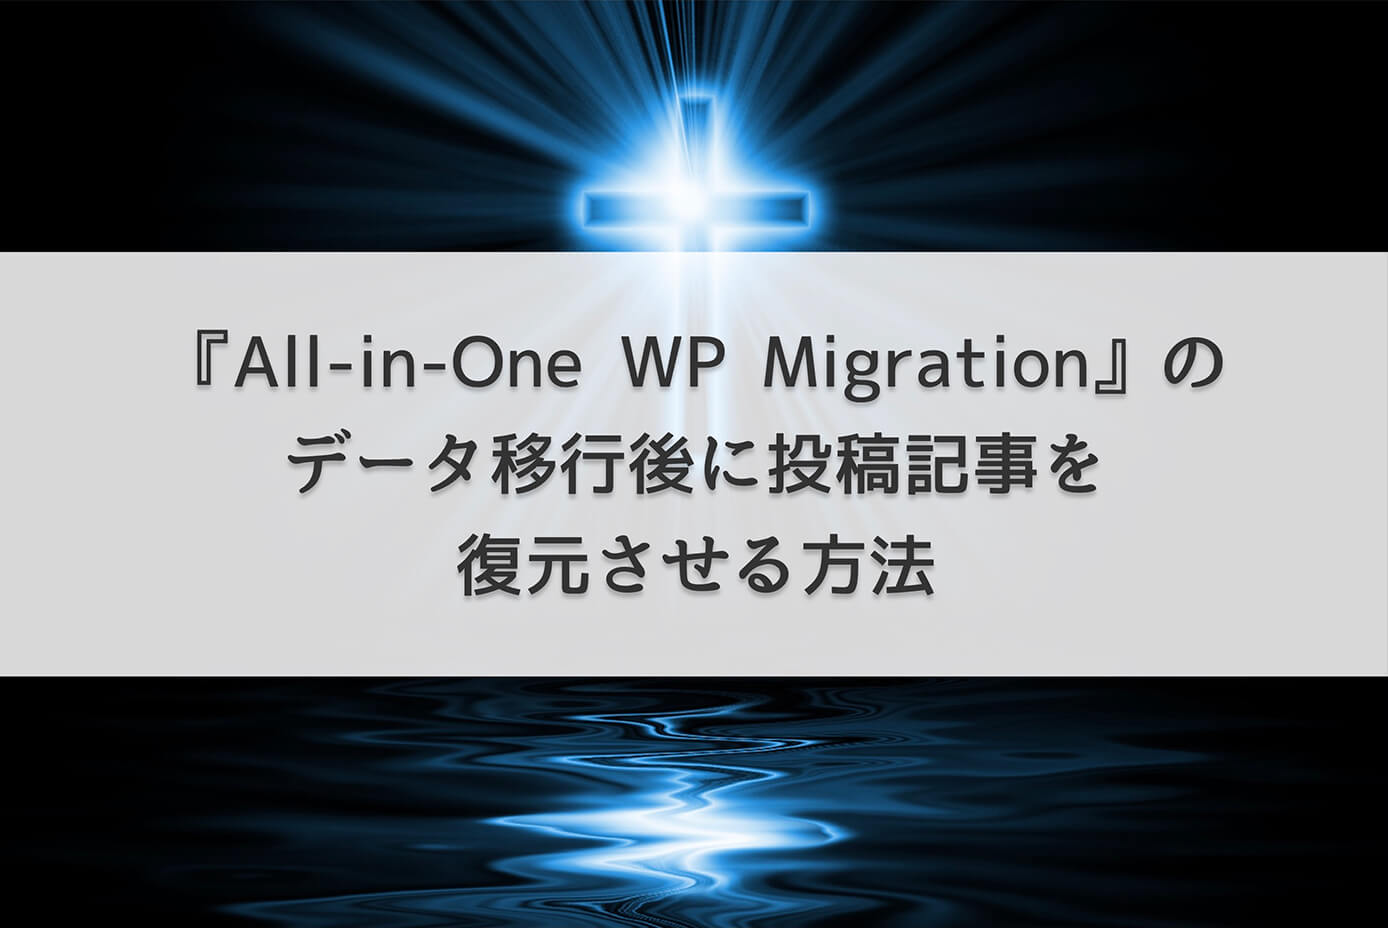 『All-in-One WP Migration』のデータ移行後に投稿記事を復元させる方法